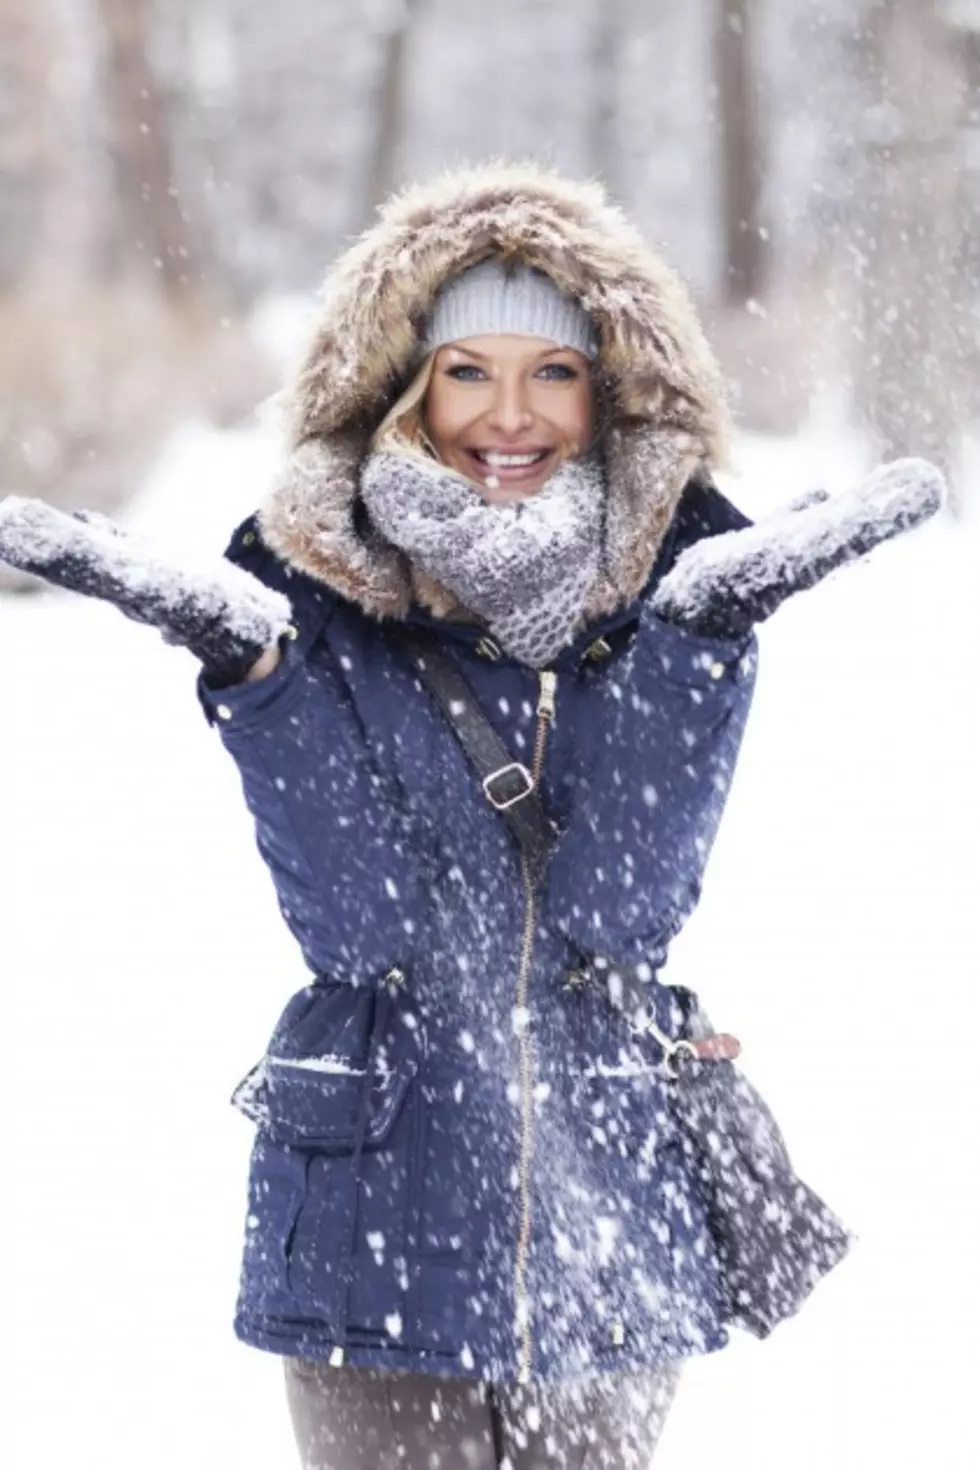 5 Surprising Health Benefits of Cold Weather